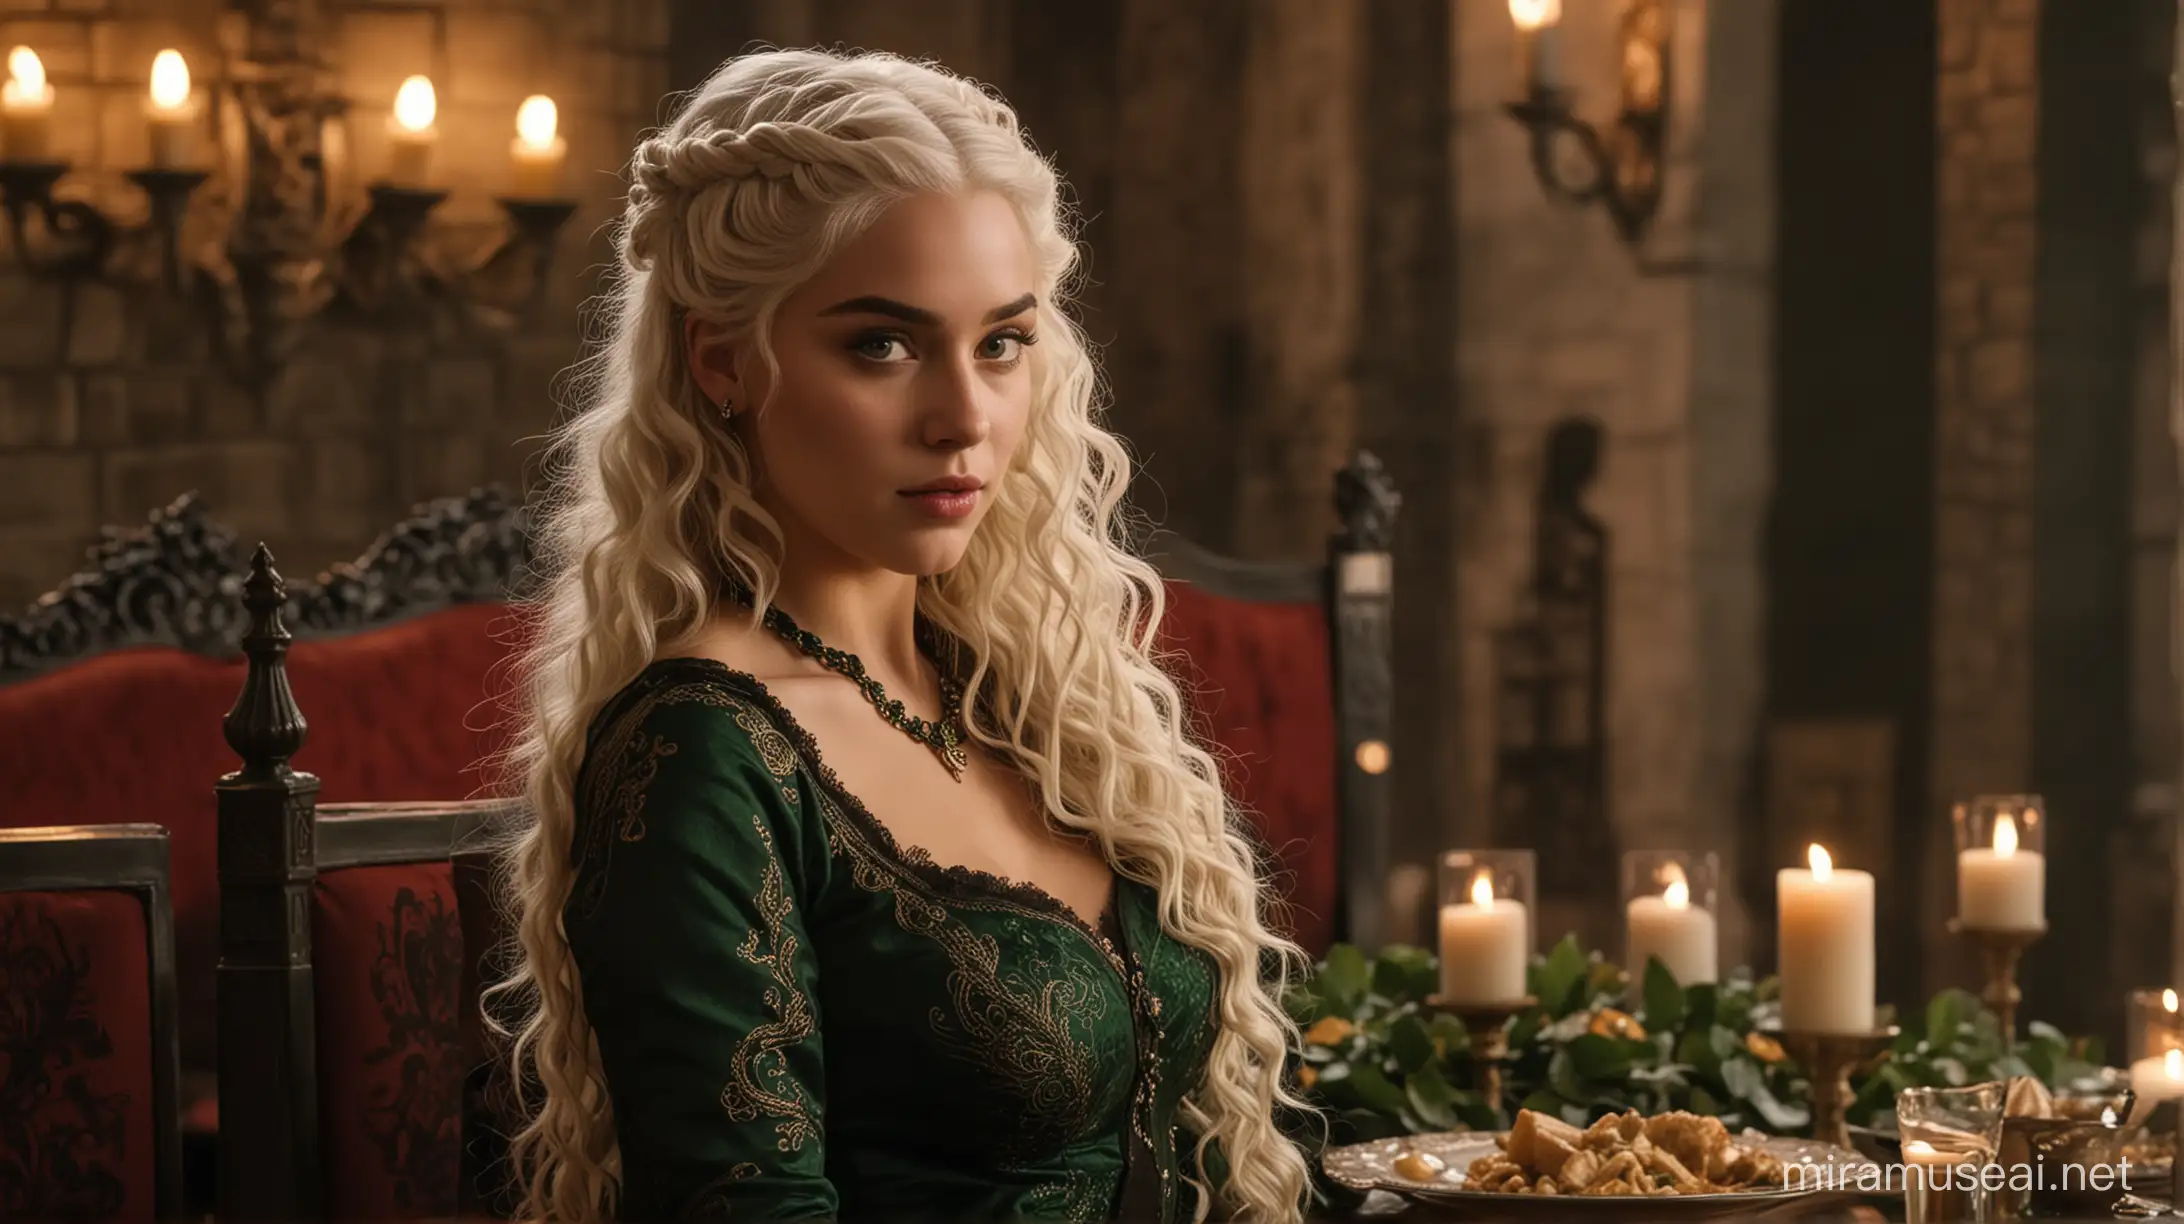 targaryen princess, white wavy/curly hair styled in half up half down with braids, dark emerald eyes, dressed in black with dragon motifs in green and gold, mid 20s, background is a candlelit dinner chamber in the Red Keep, she is dressed for dinner, 